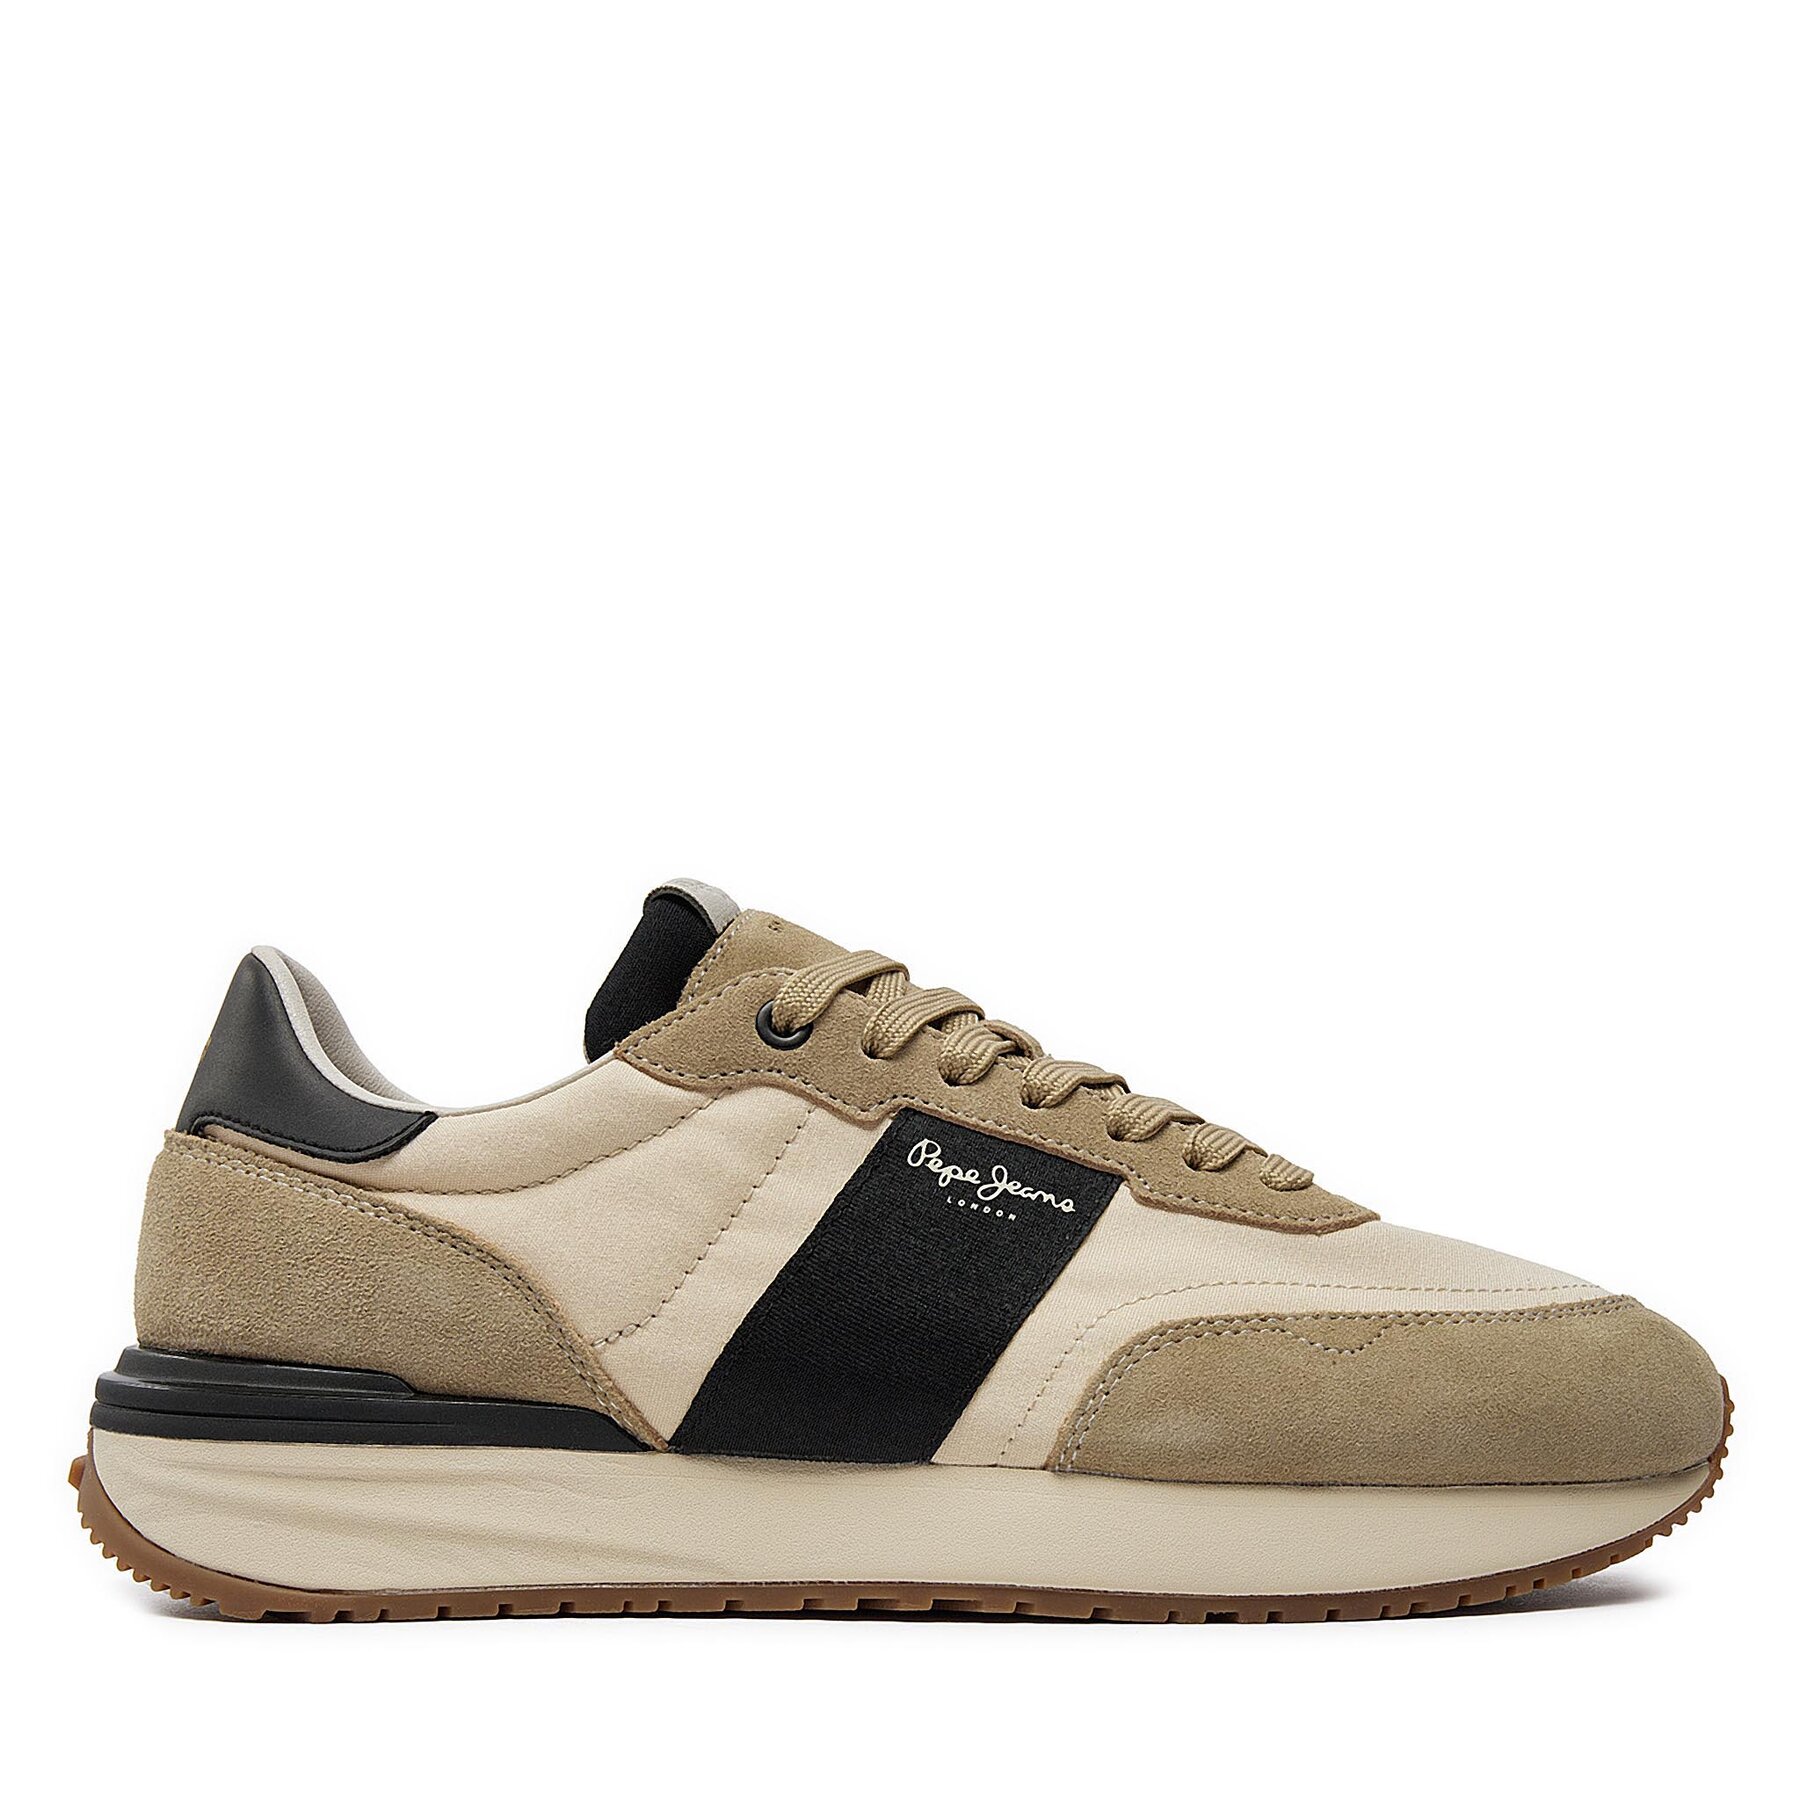 Sneakers Pepe Jeans Buster Tape PMS60006 Beige 844 von Pepe Jeans